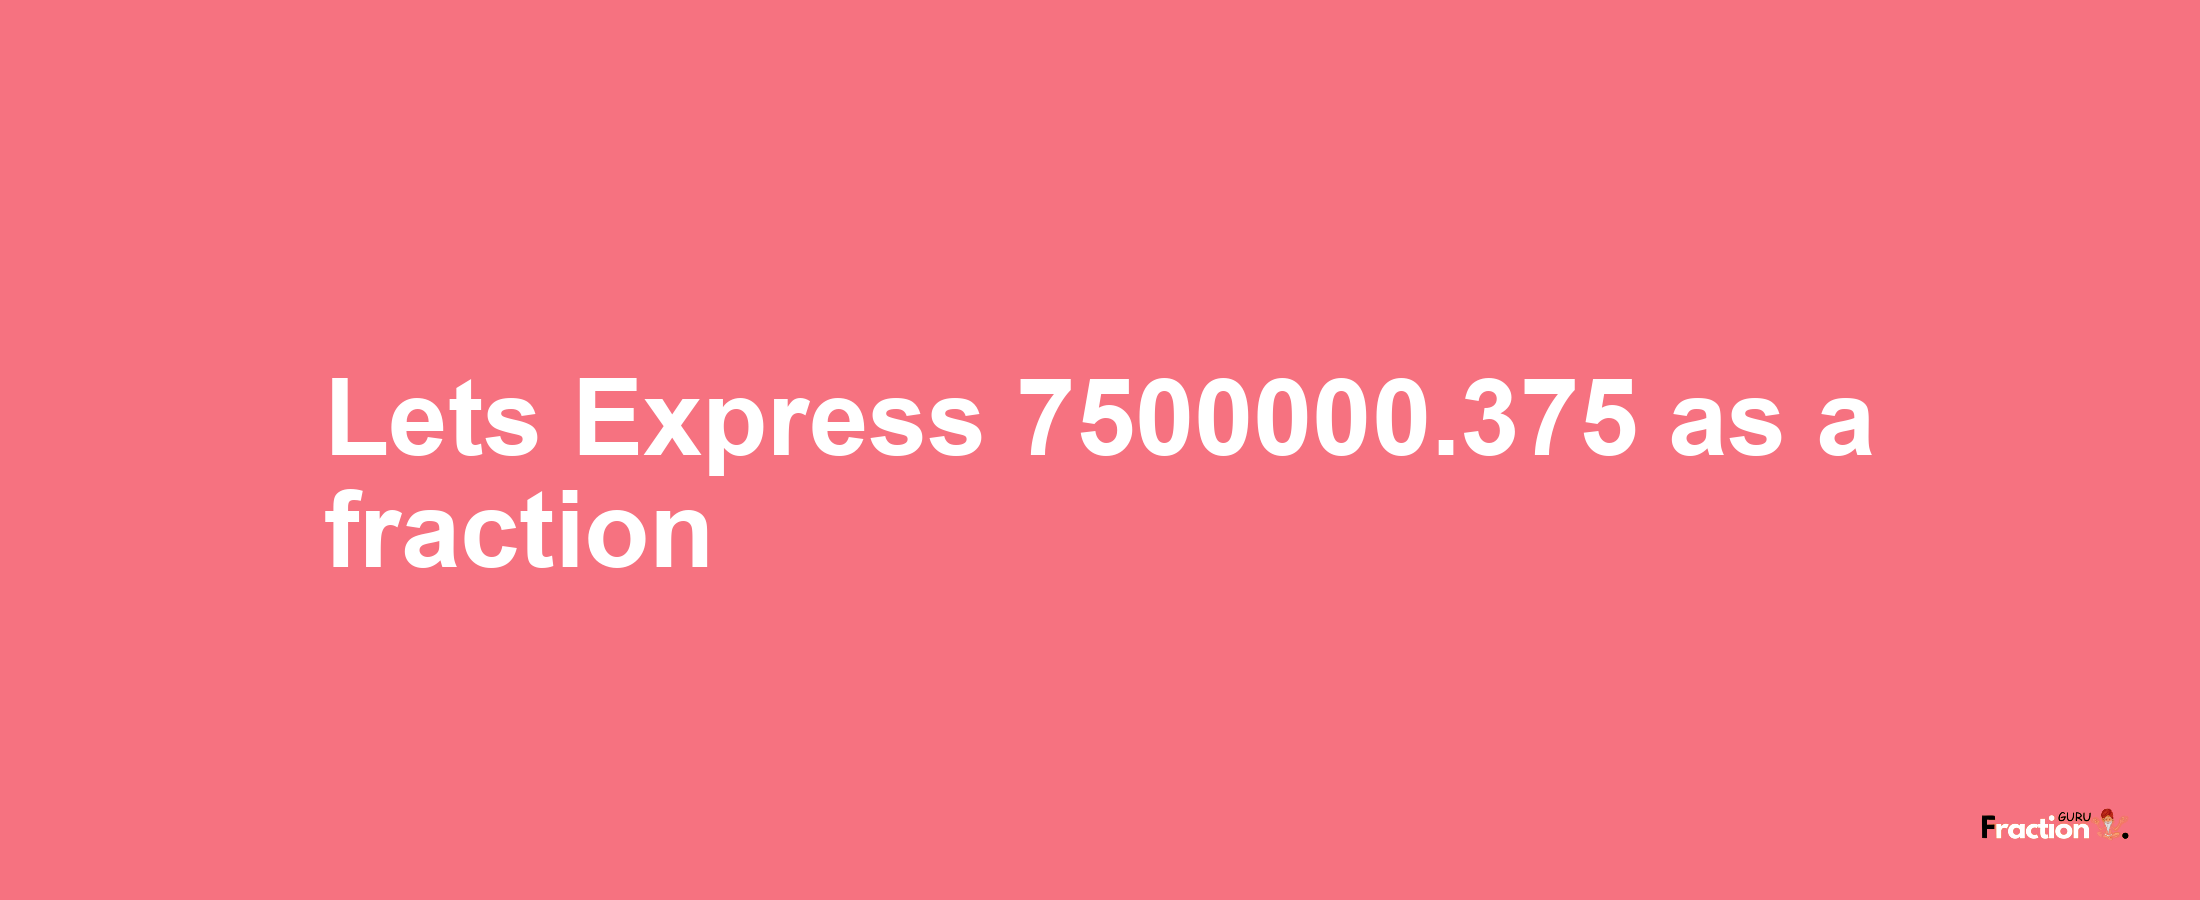 Lets Express 7500000.375 as afraction